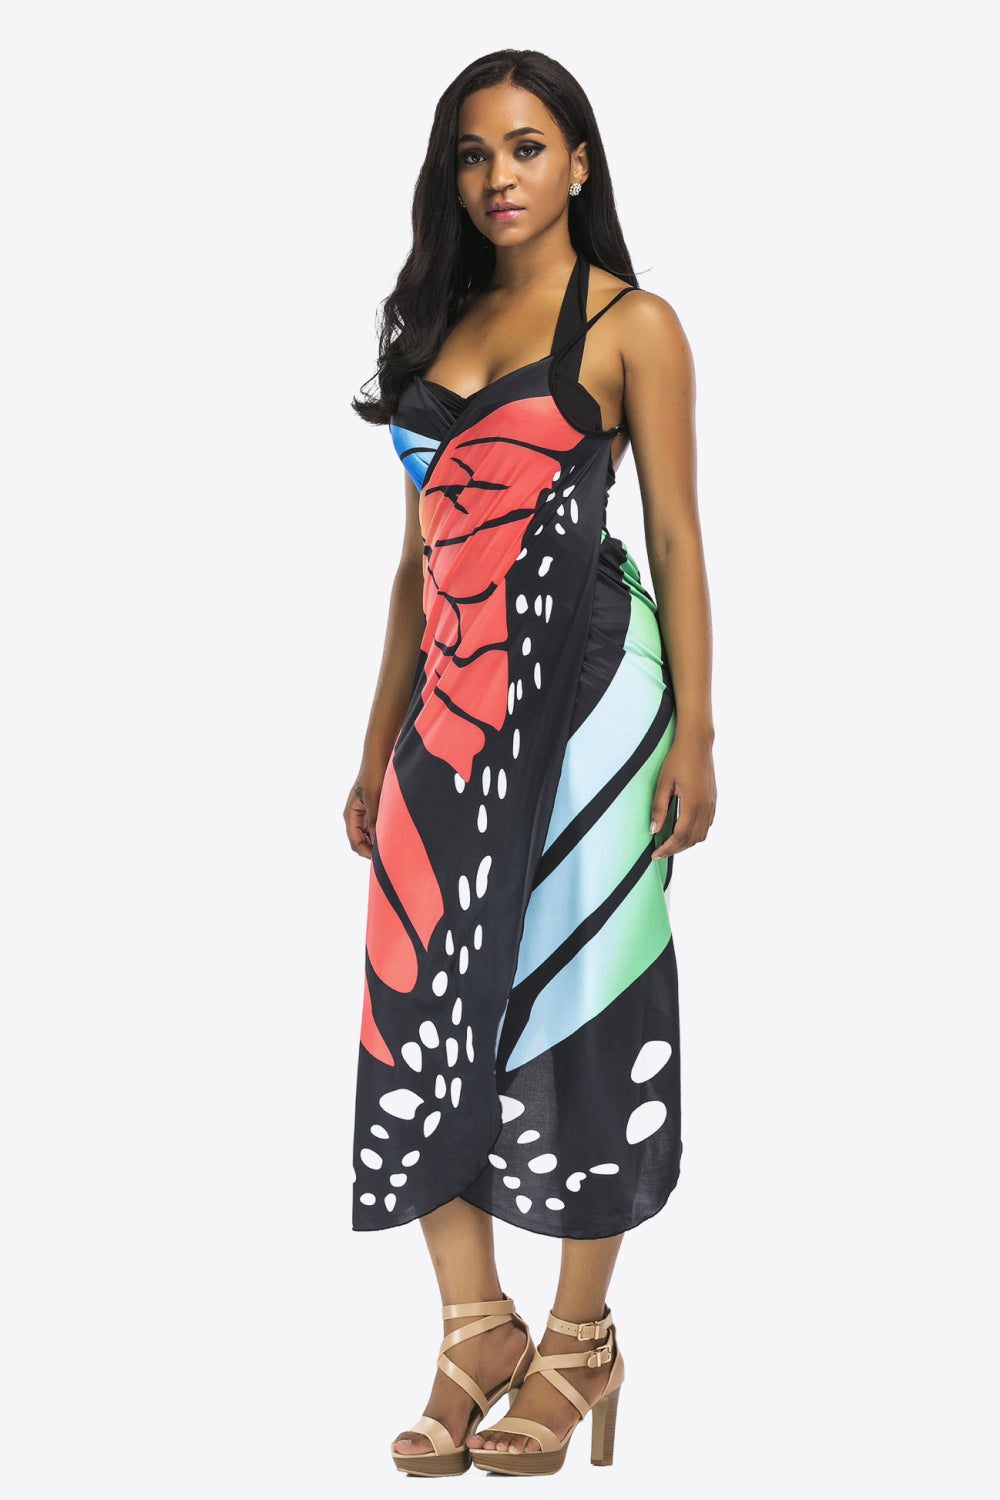 Swimwear-cover up—Butterfly Design with Spaghetti Straps- 3 color to choose from